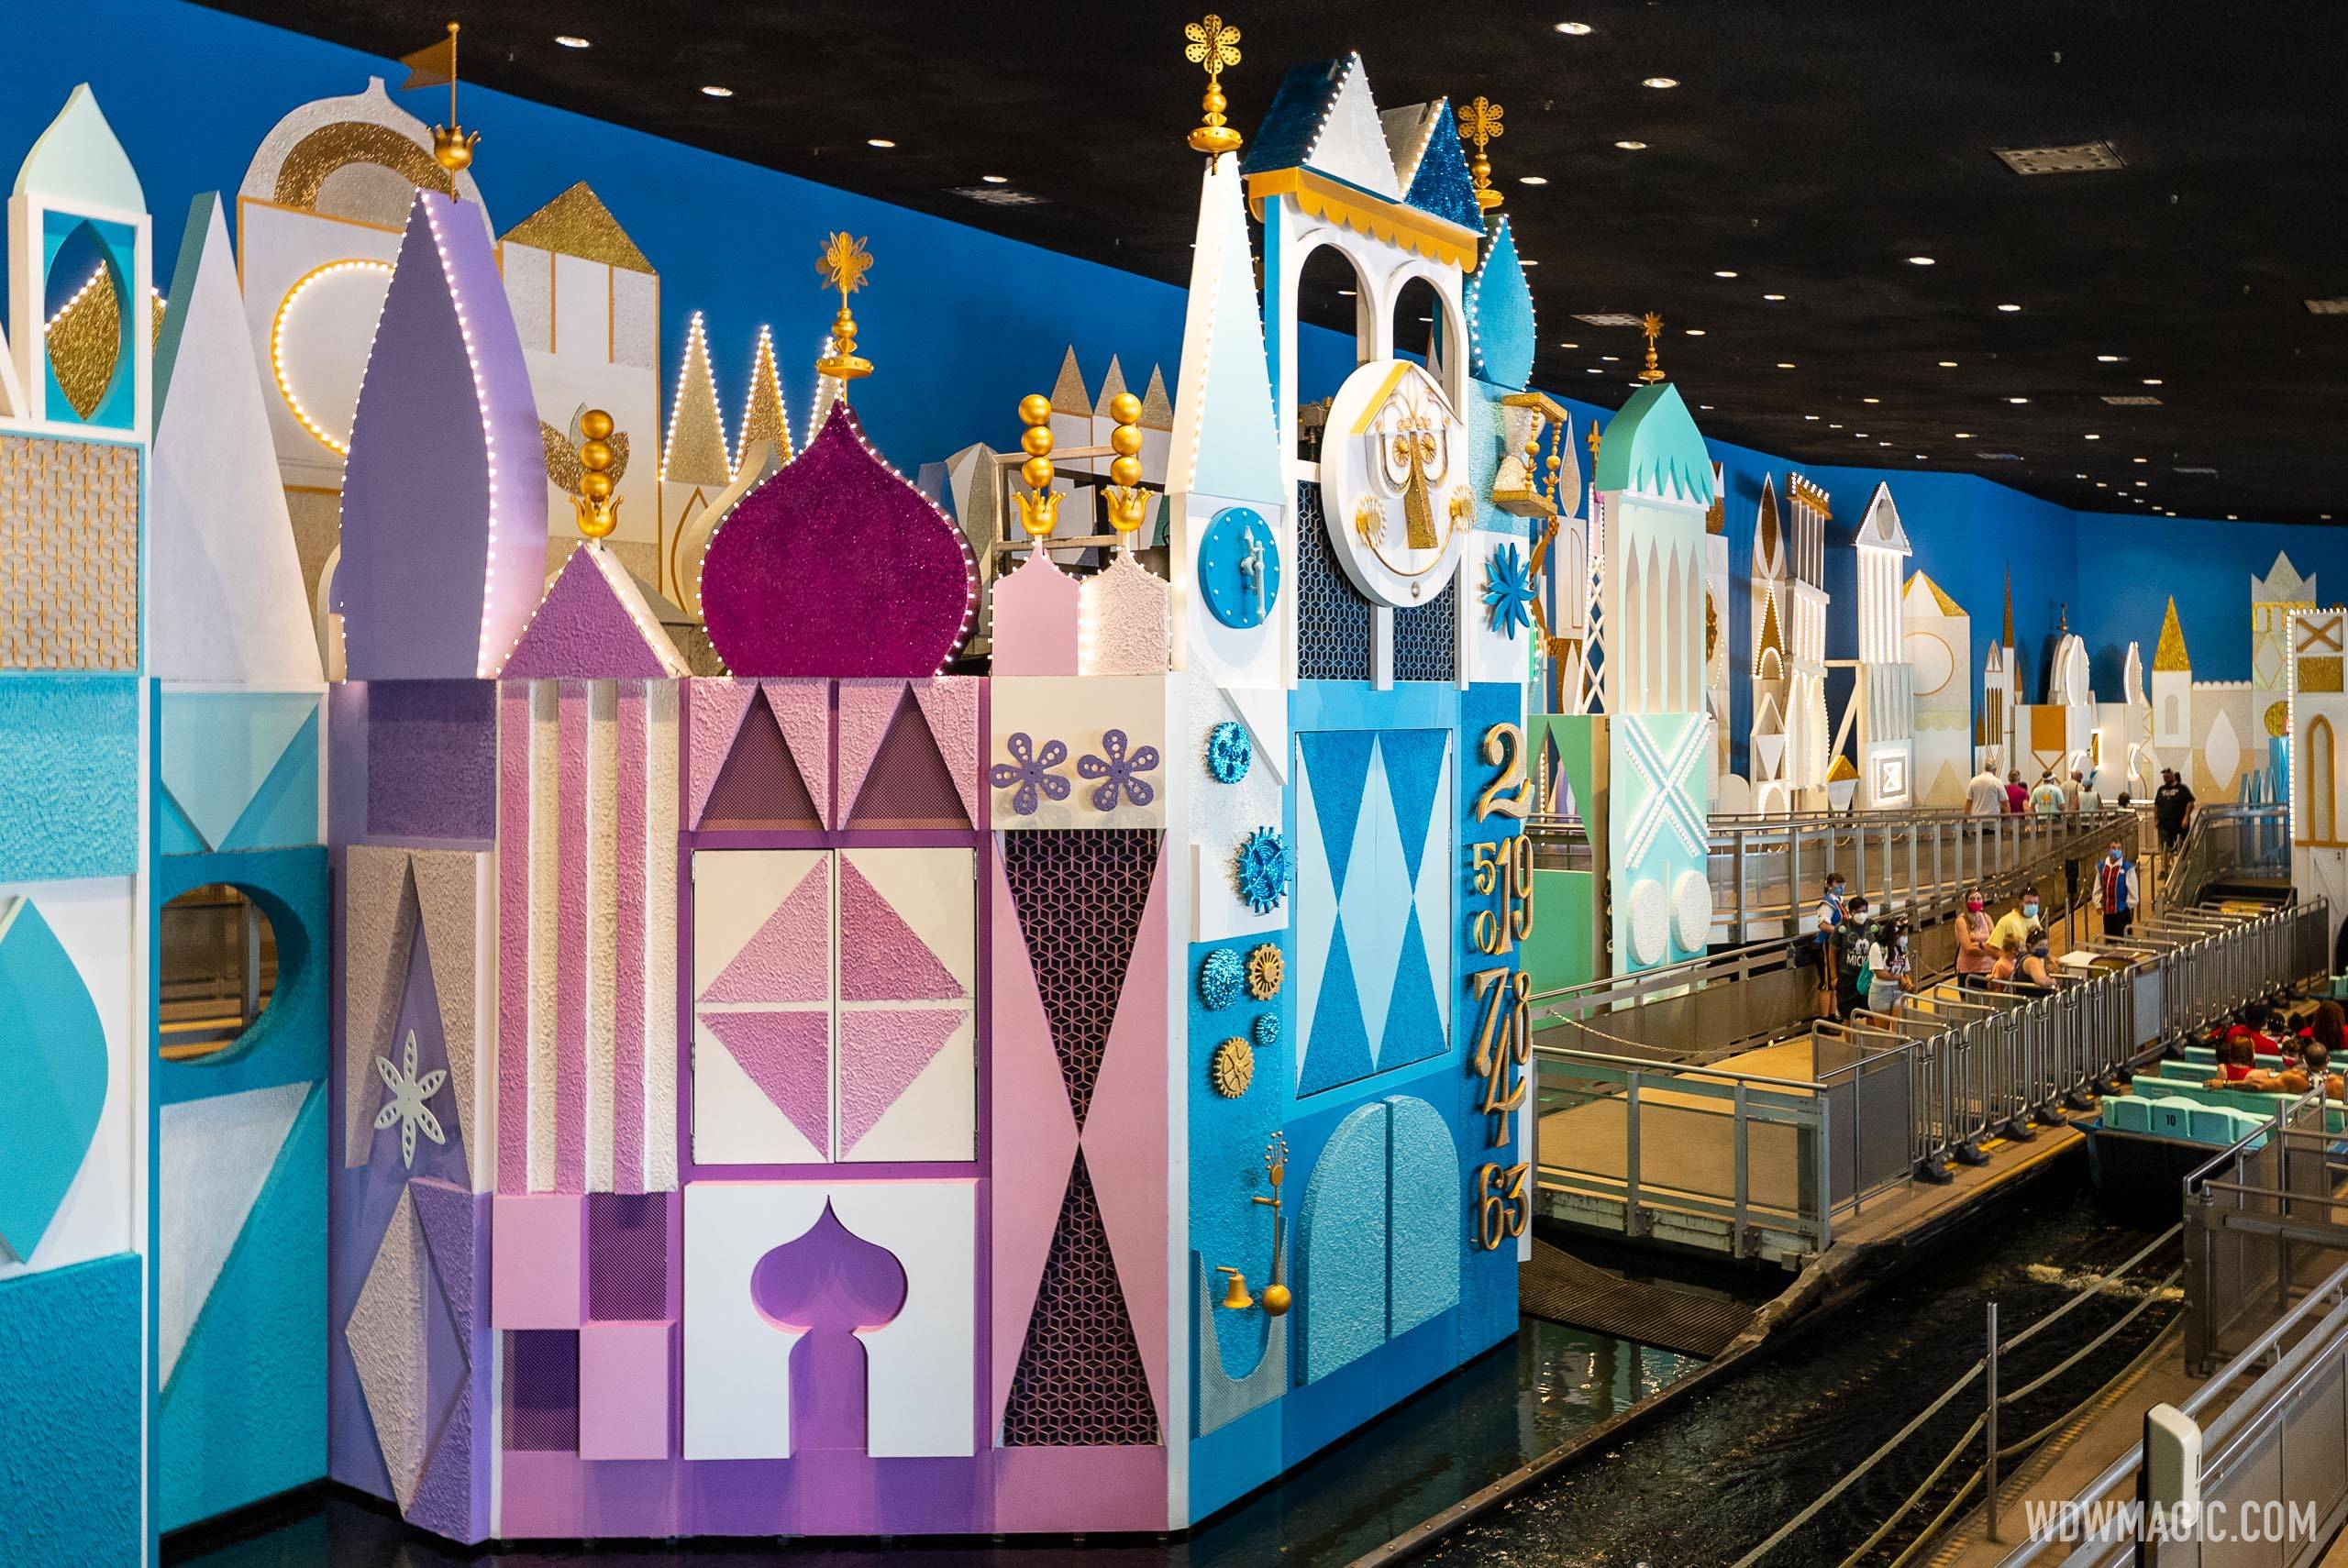 New queue area design changes continue at 'it's a small world' in the Magic Kingdom